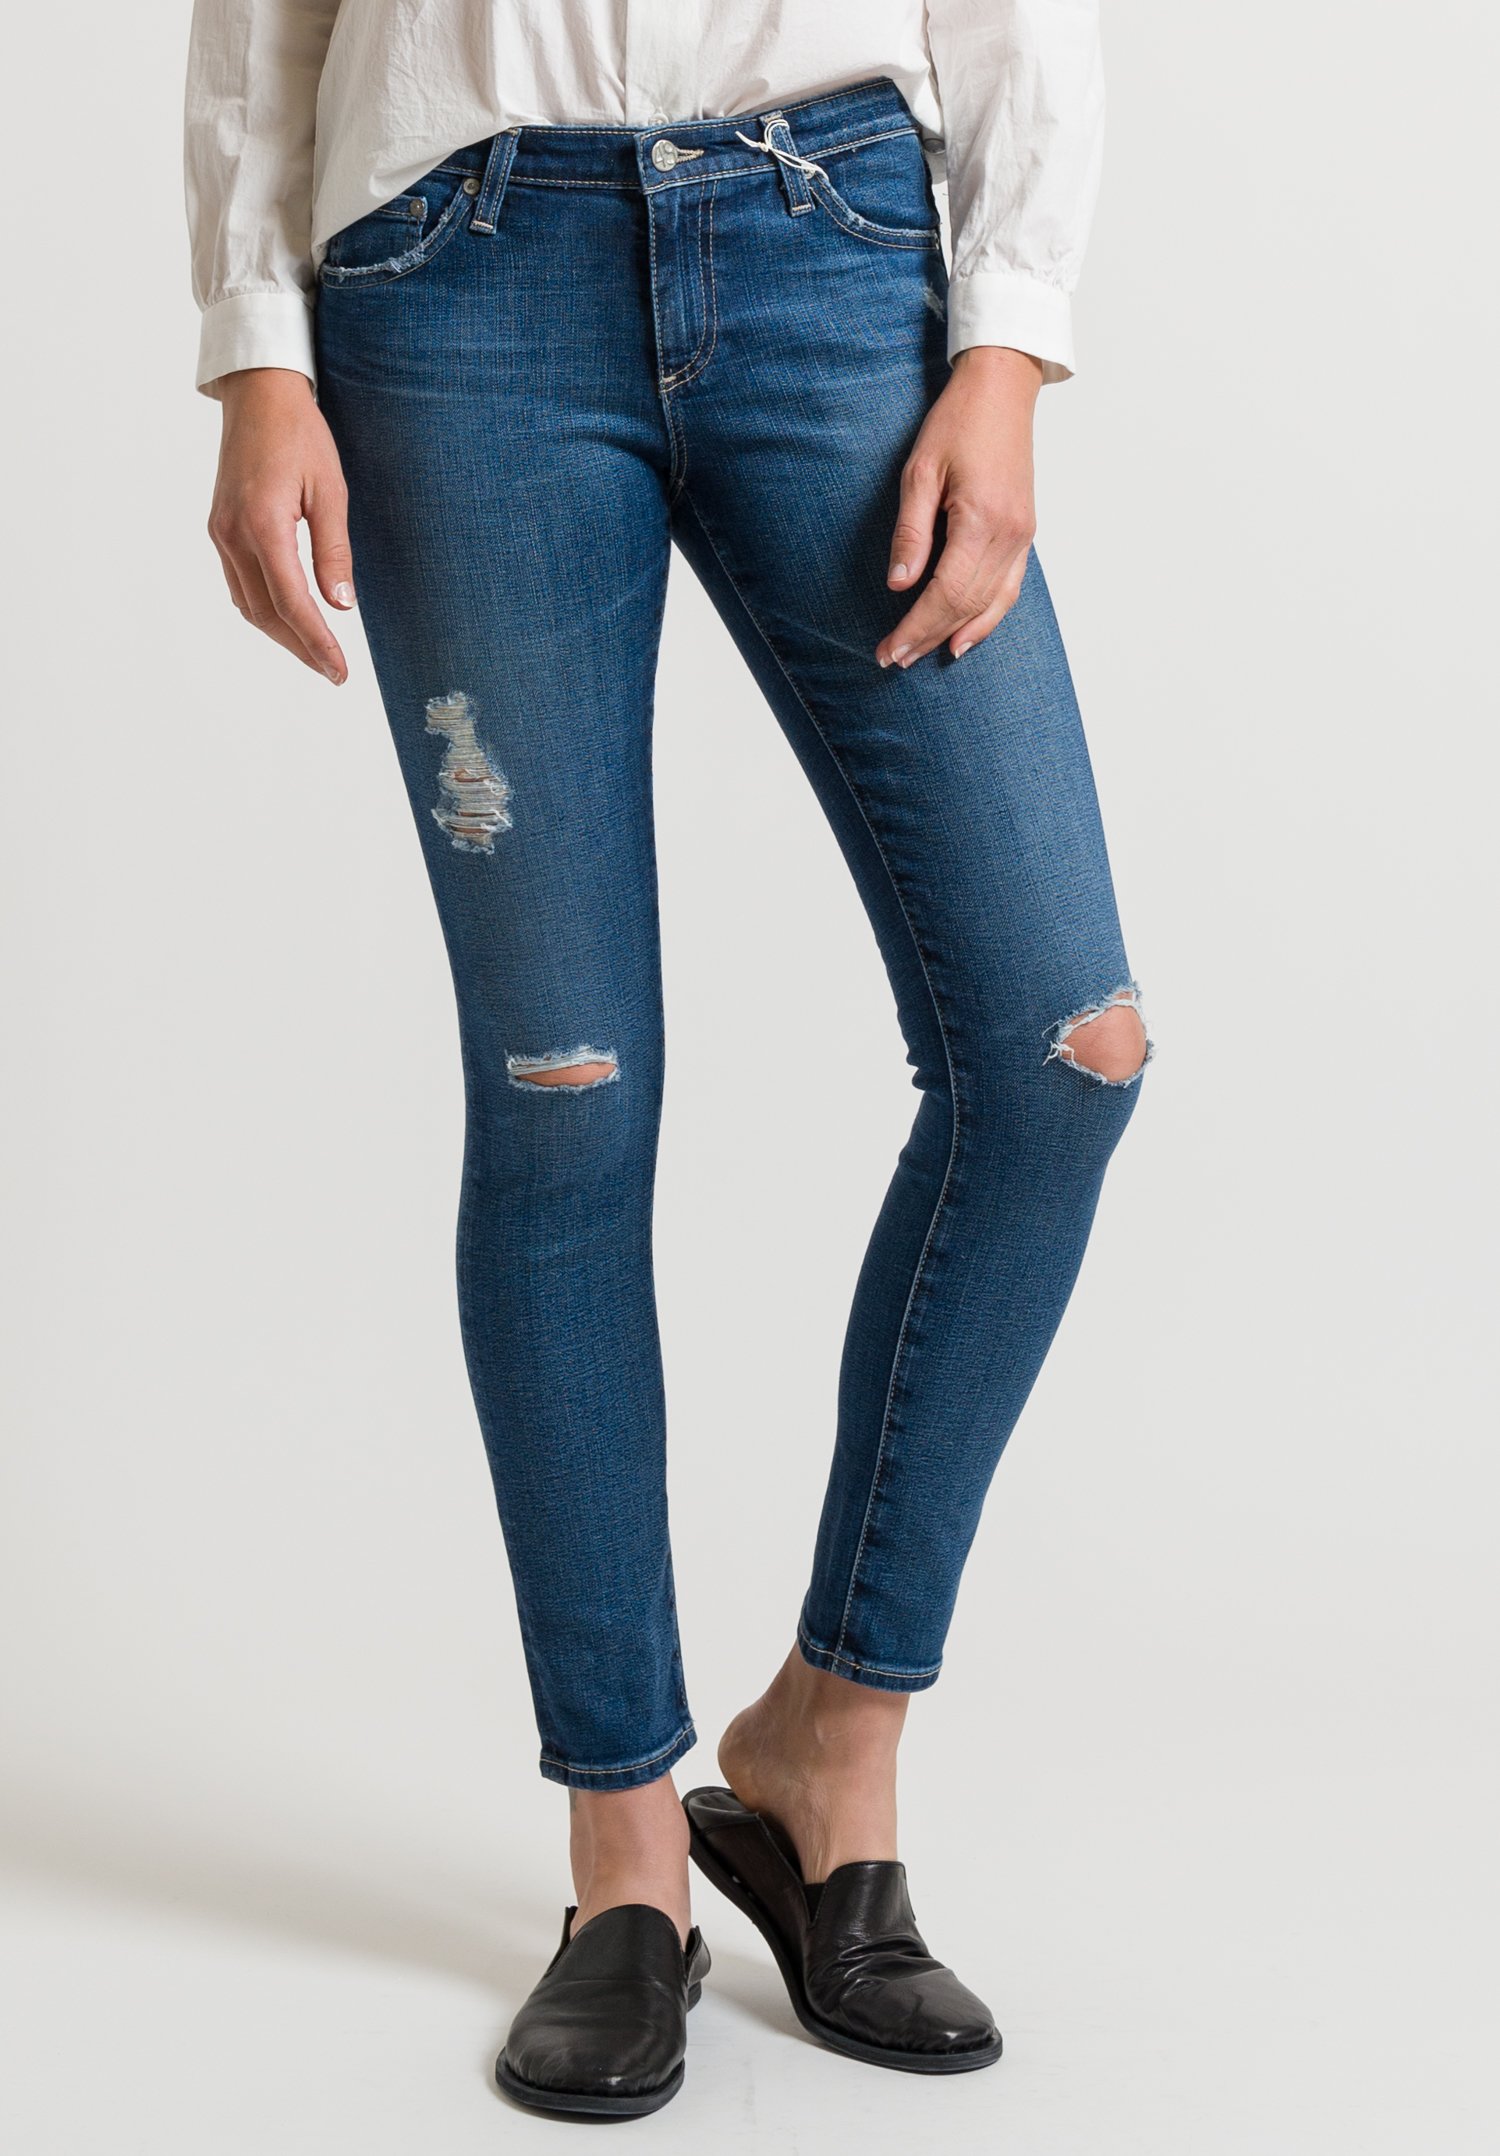 ag distressed legging ankle jeans